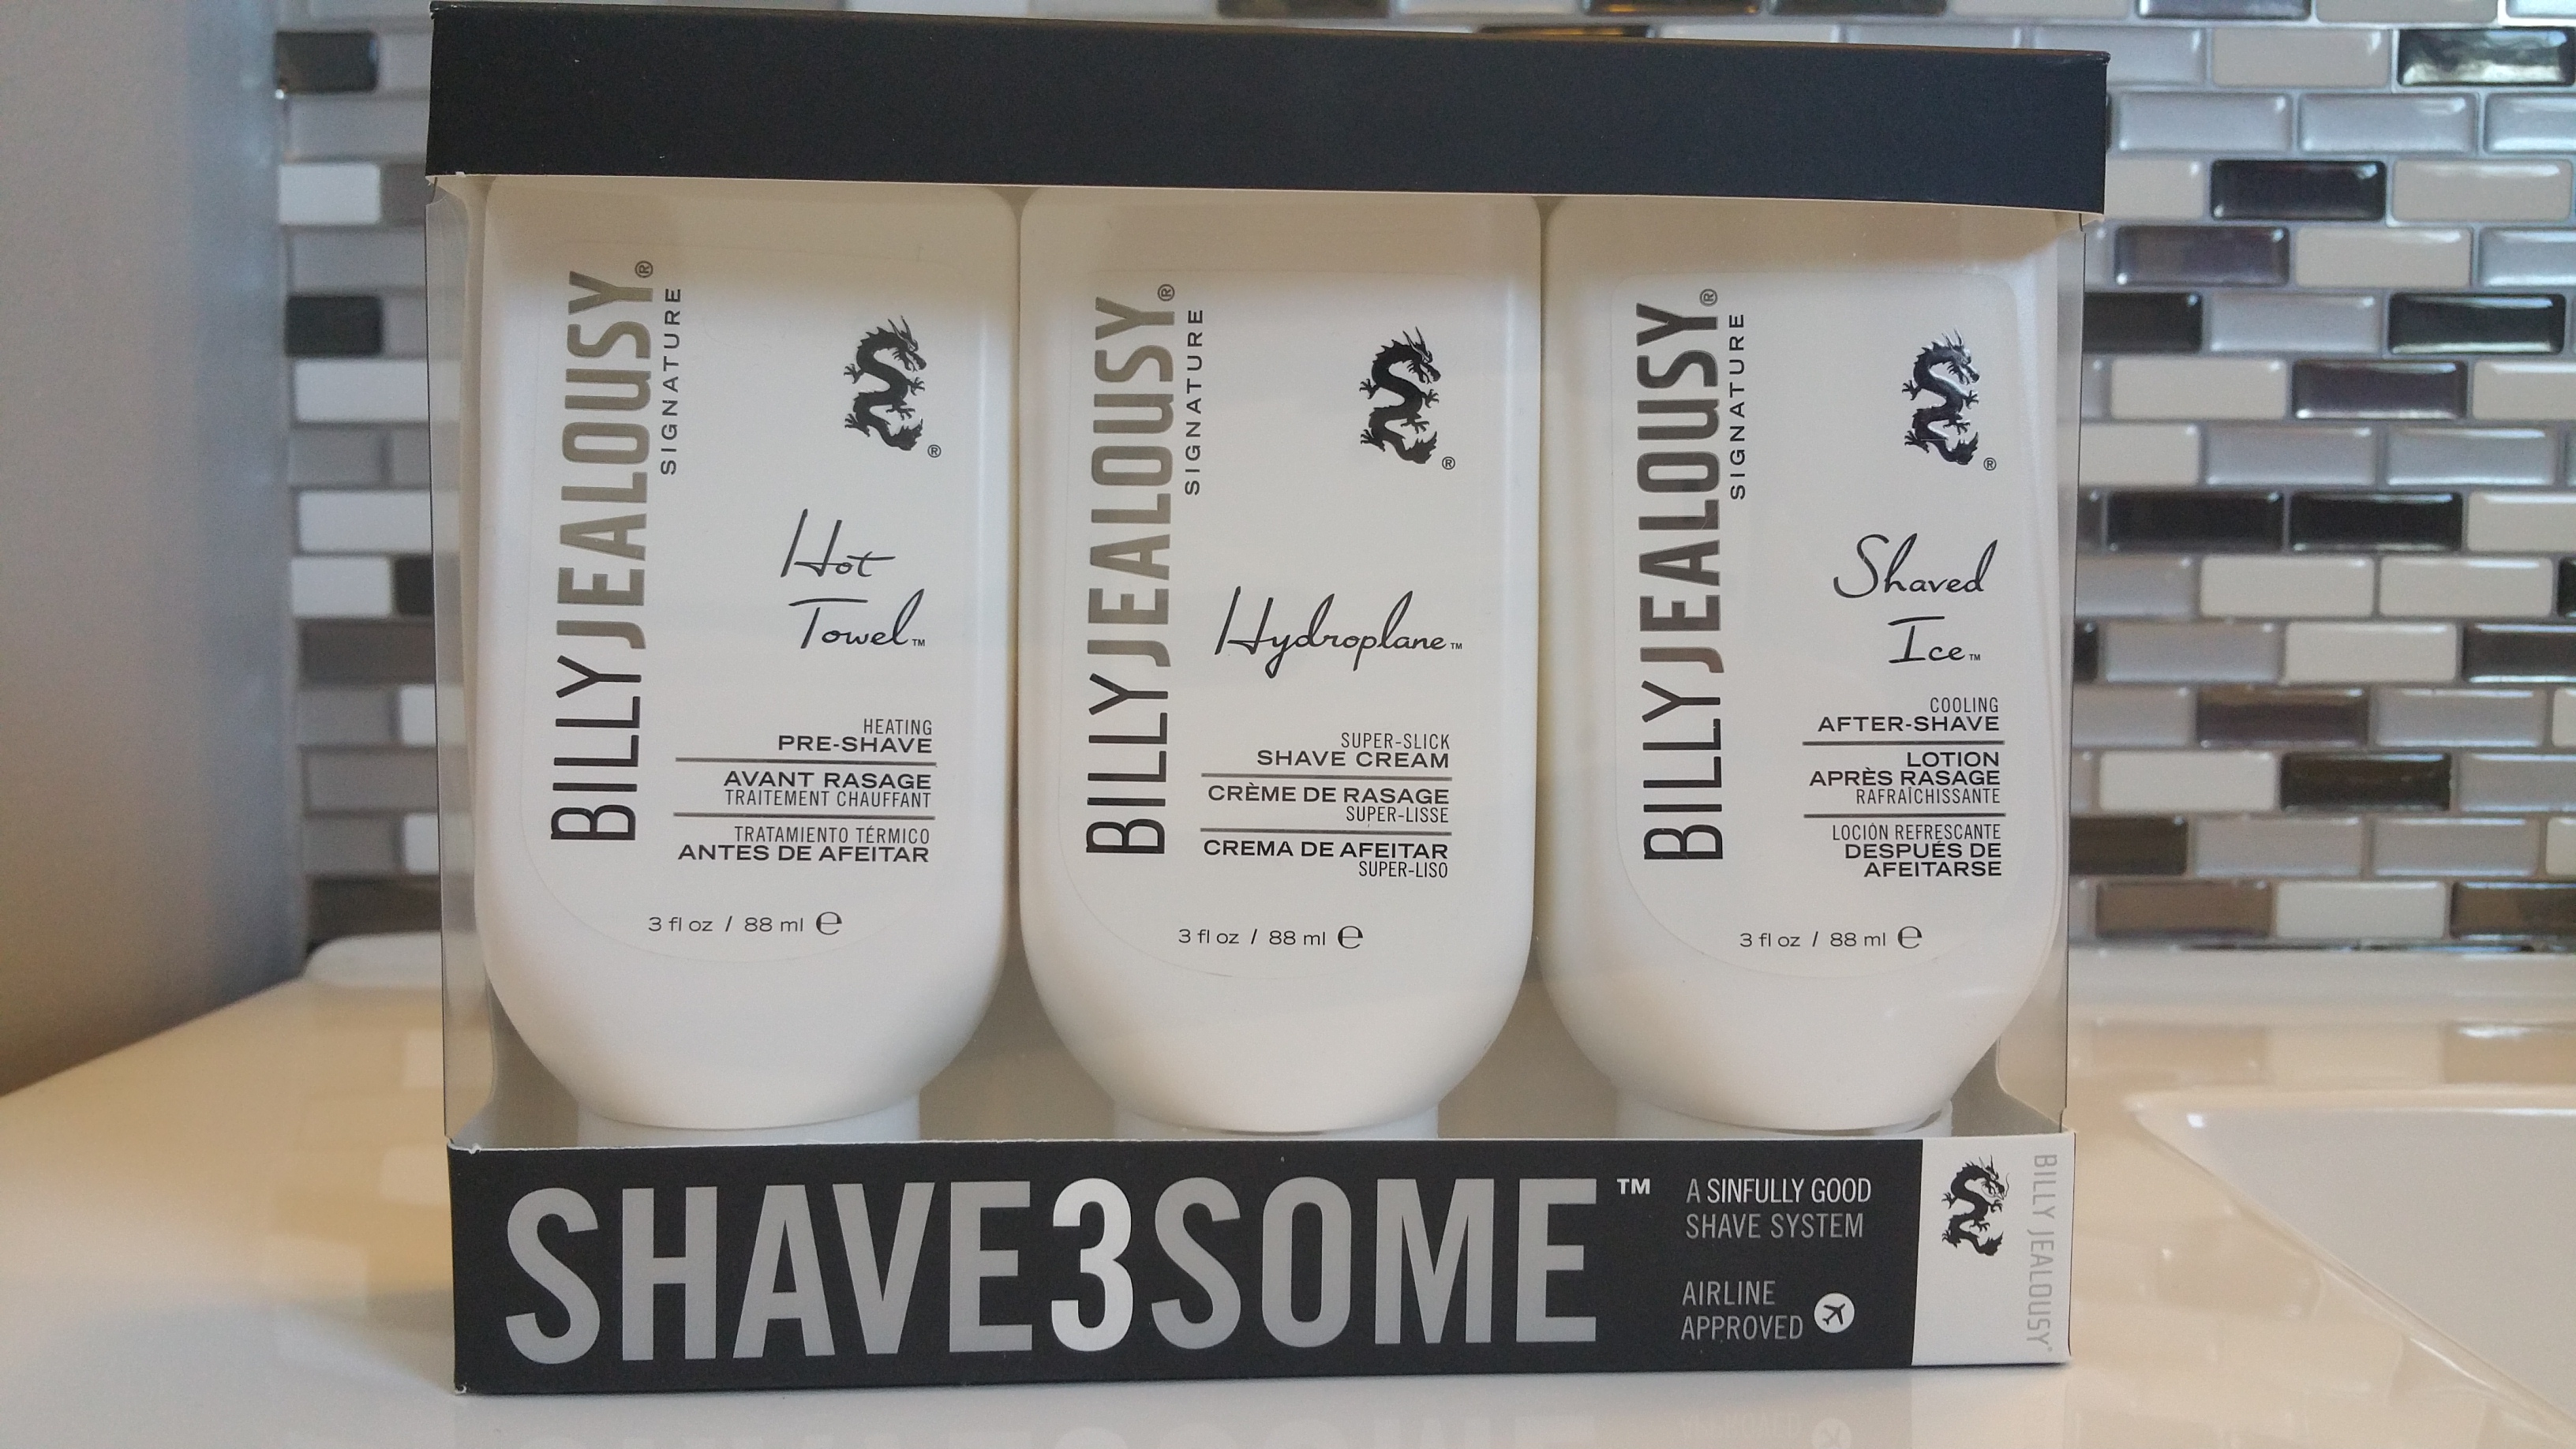 SHAVE3SOME